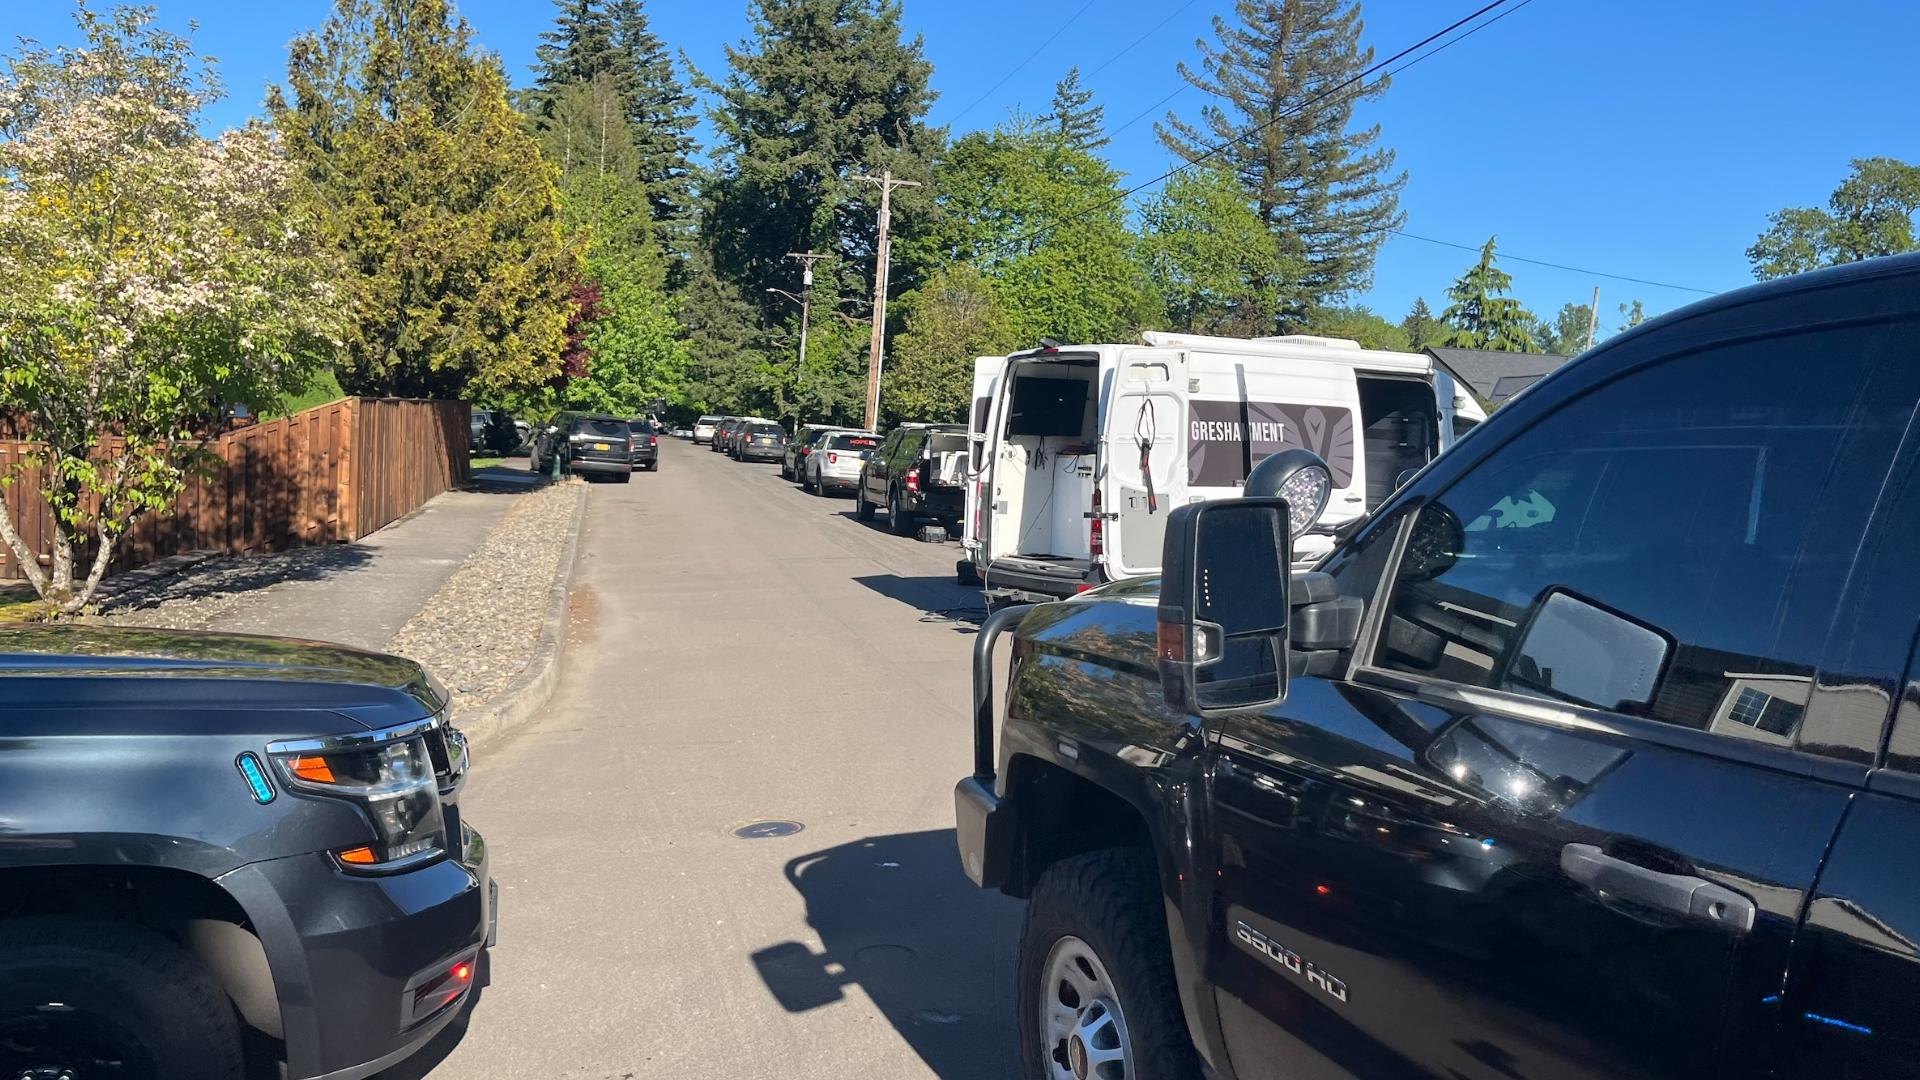 The owner of a home on Bridge Street called 911 to report a man they didn't know was trying to break into their home, the Multnomah County Sheriff's Office said.